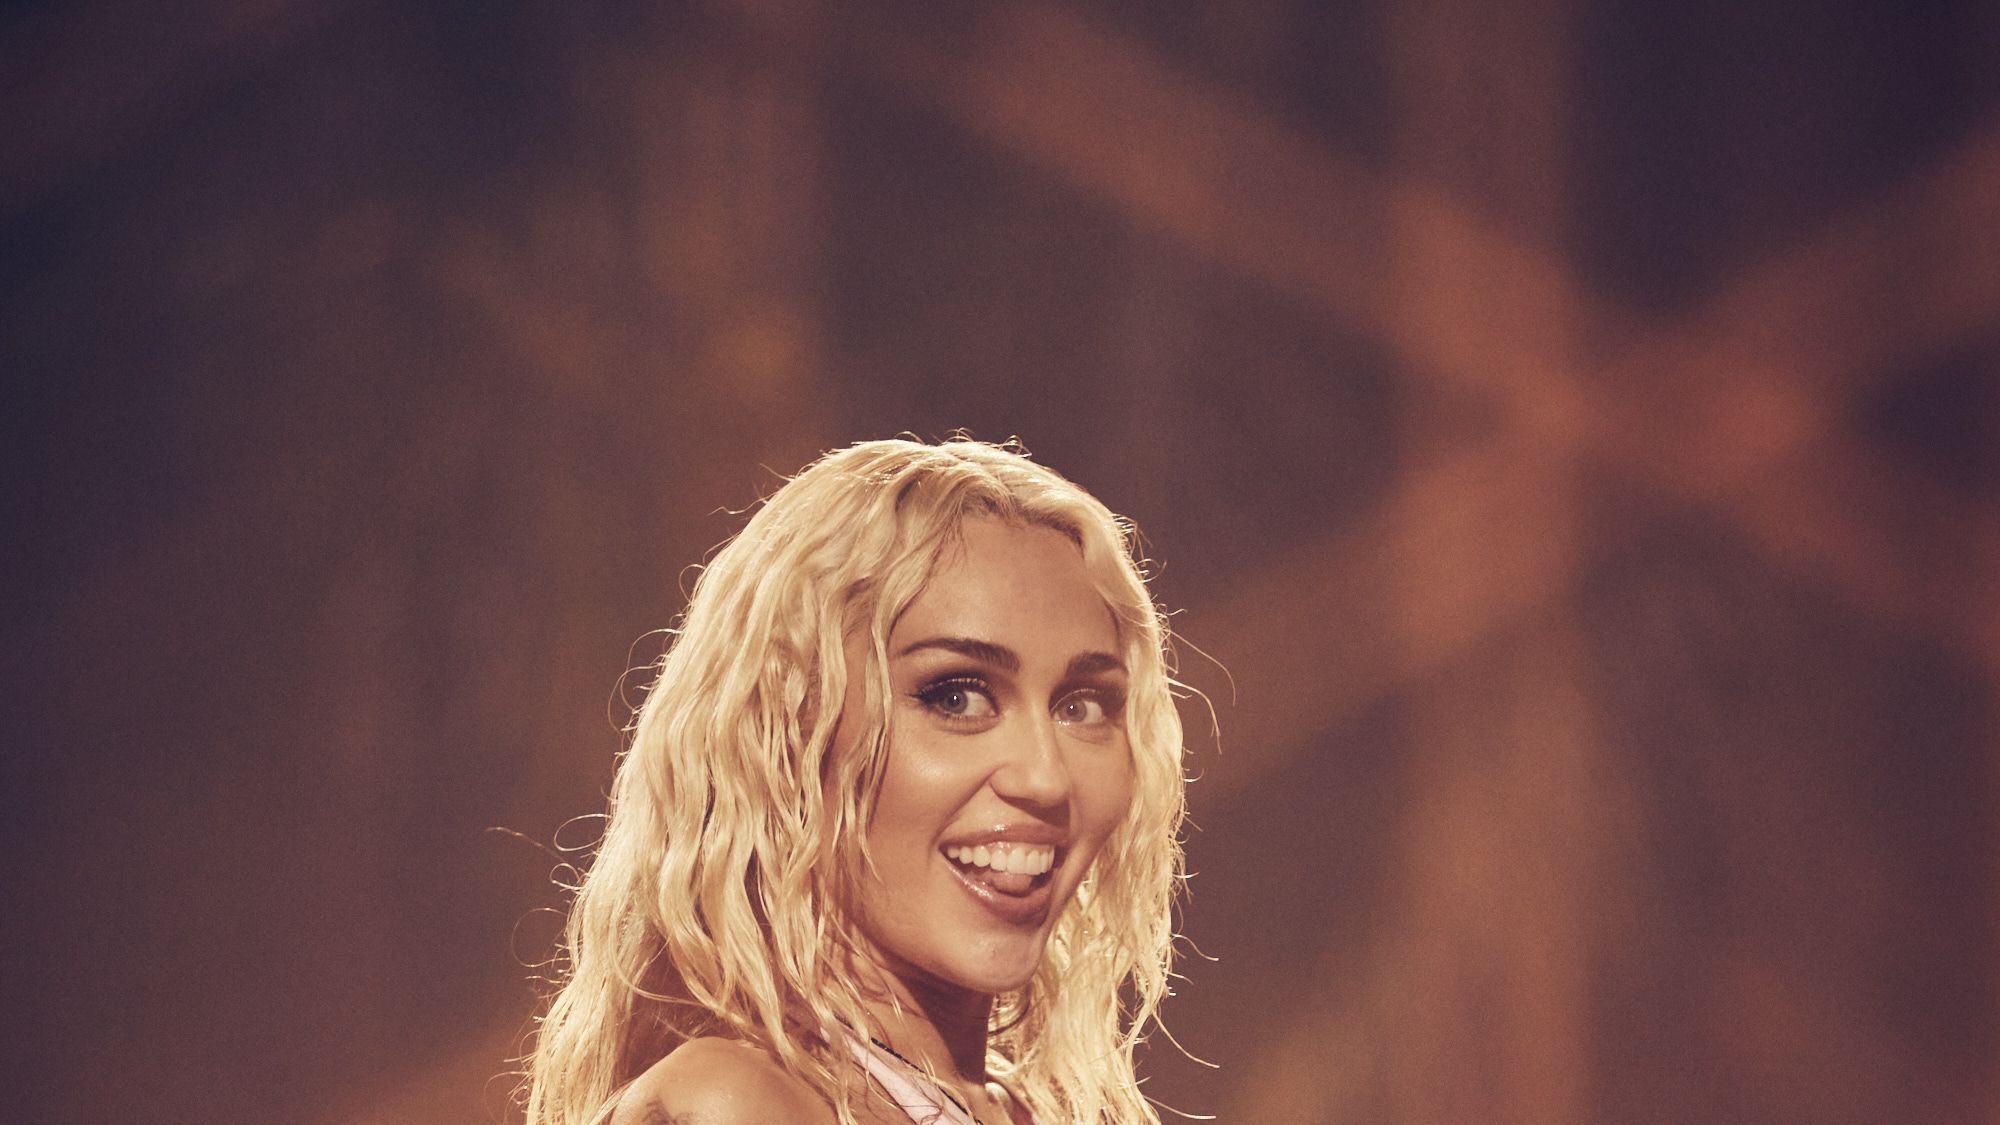 Miley Cyrus News, Pictures, and Videos - E! Online